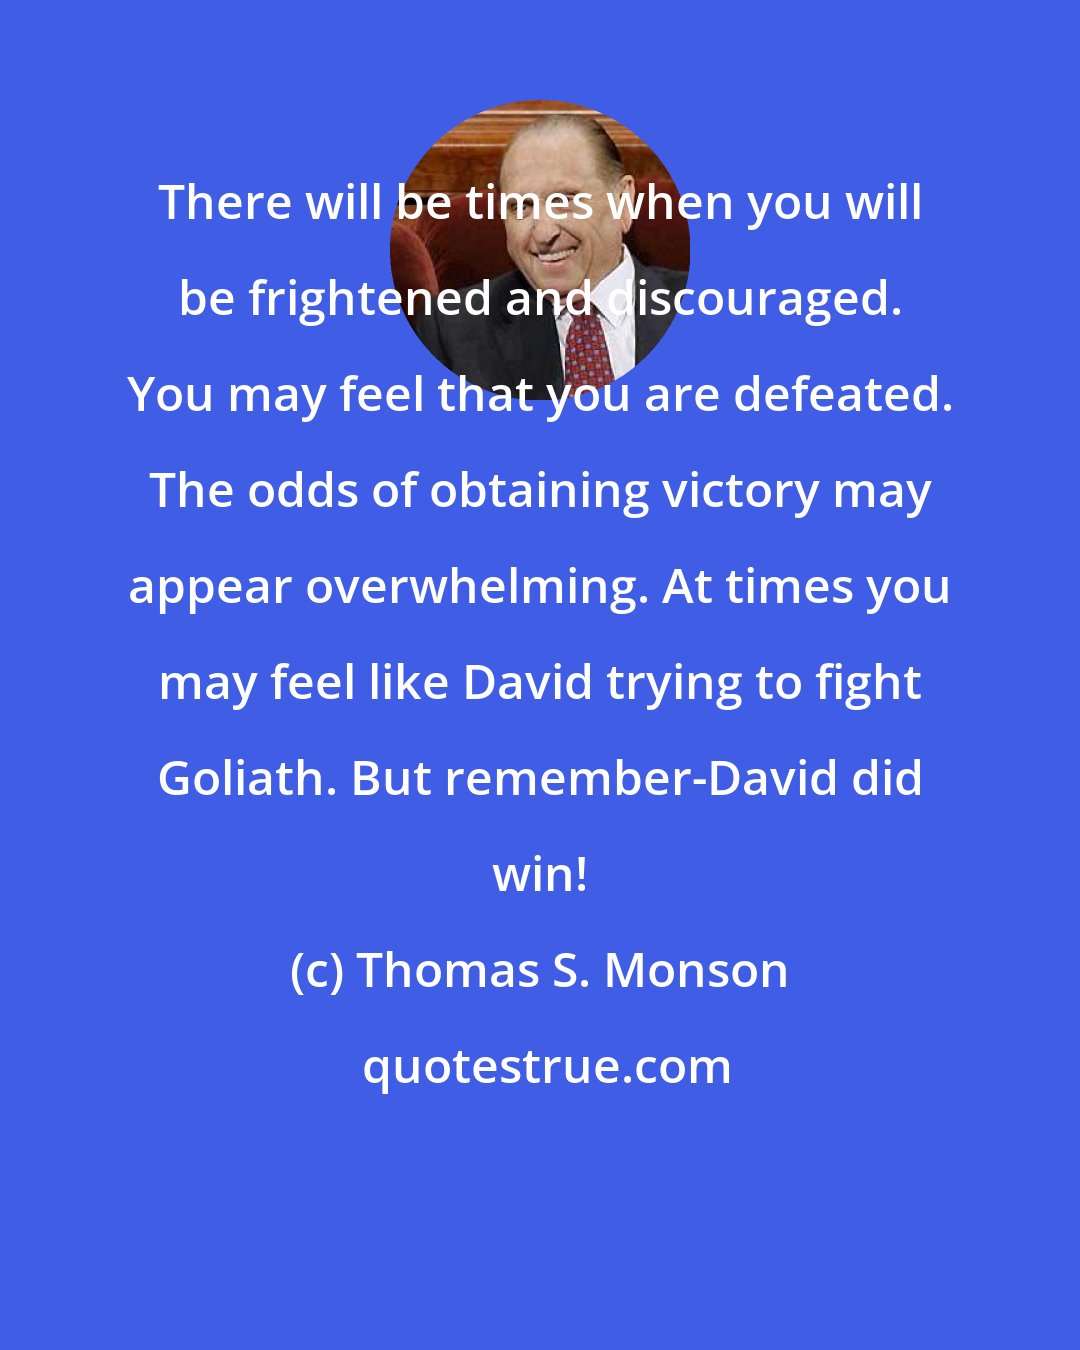 Thomas S. Monson: There will be times when you will be frightened and discouraged. You may feel that you are defeated. The odds of obtaining victory may appear overwhelming. At times you may feel like David trying to fight Goliath. But remember-David did win!